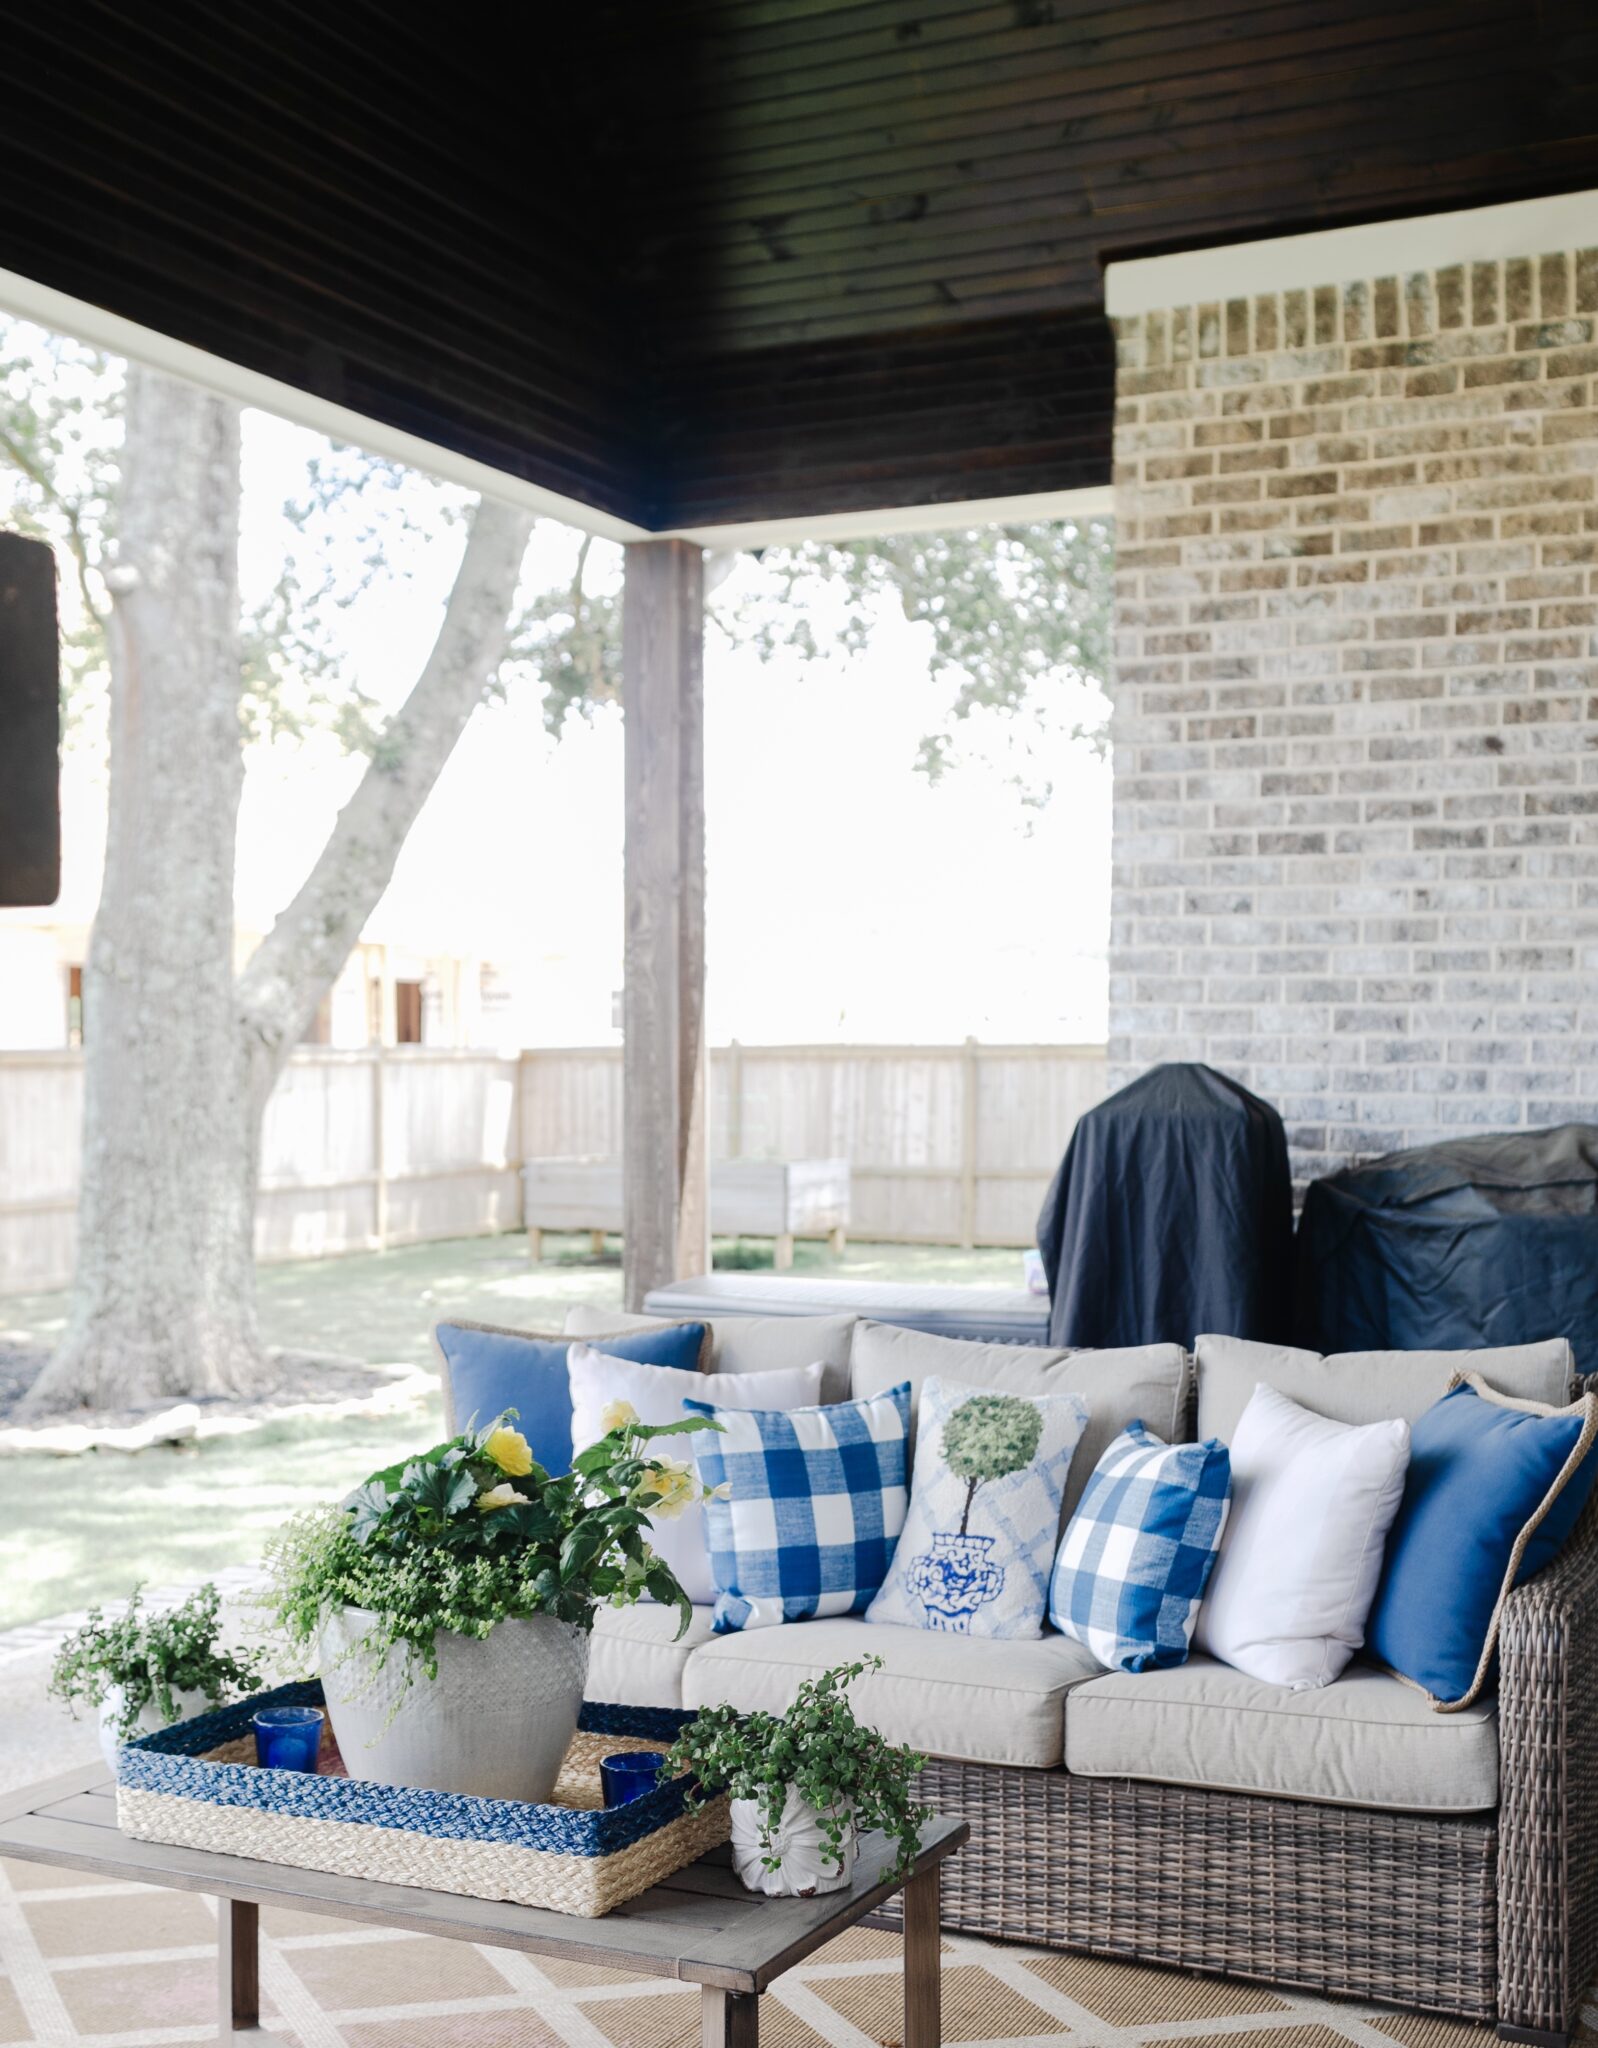 Wayfair Outdoor Furniture and Decor featured by top Memphis lifestyle blogger, Walking in Memphis in High Heels.